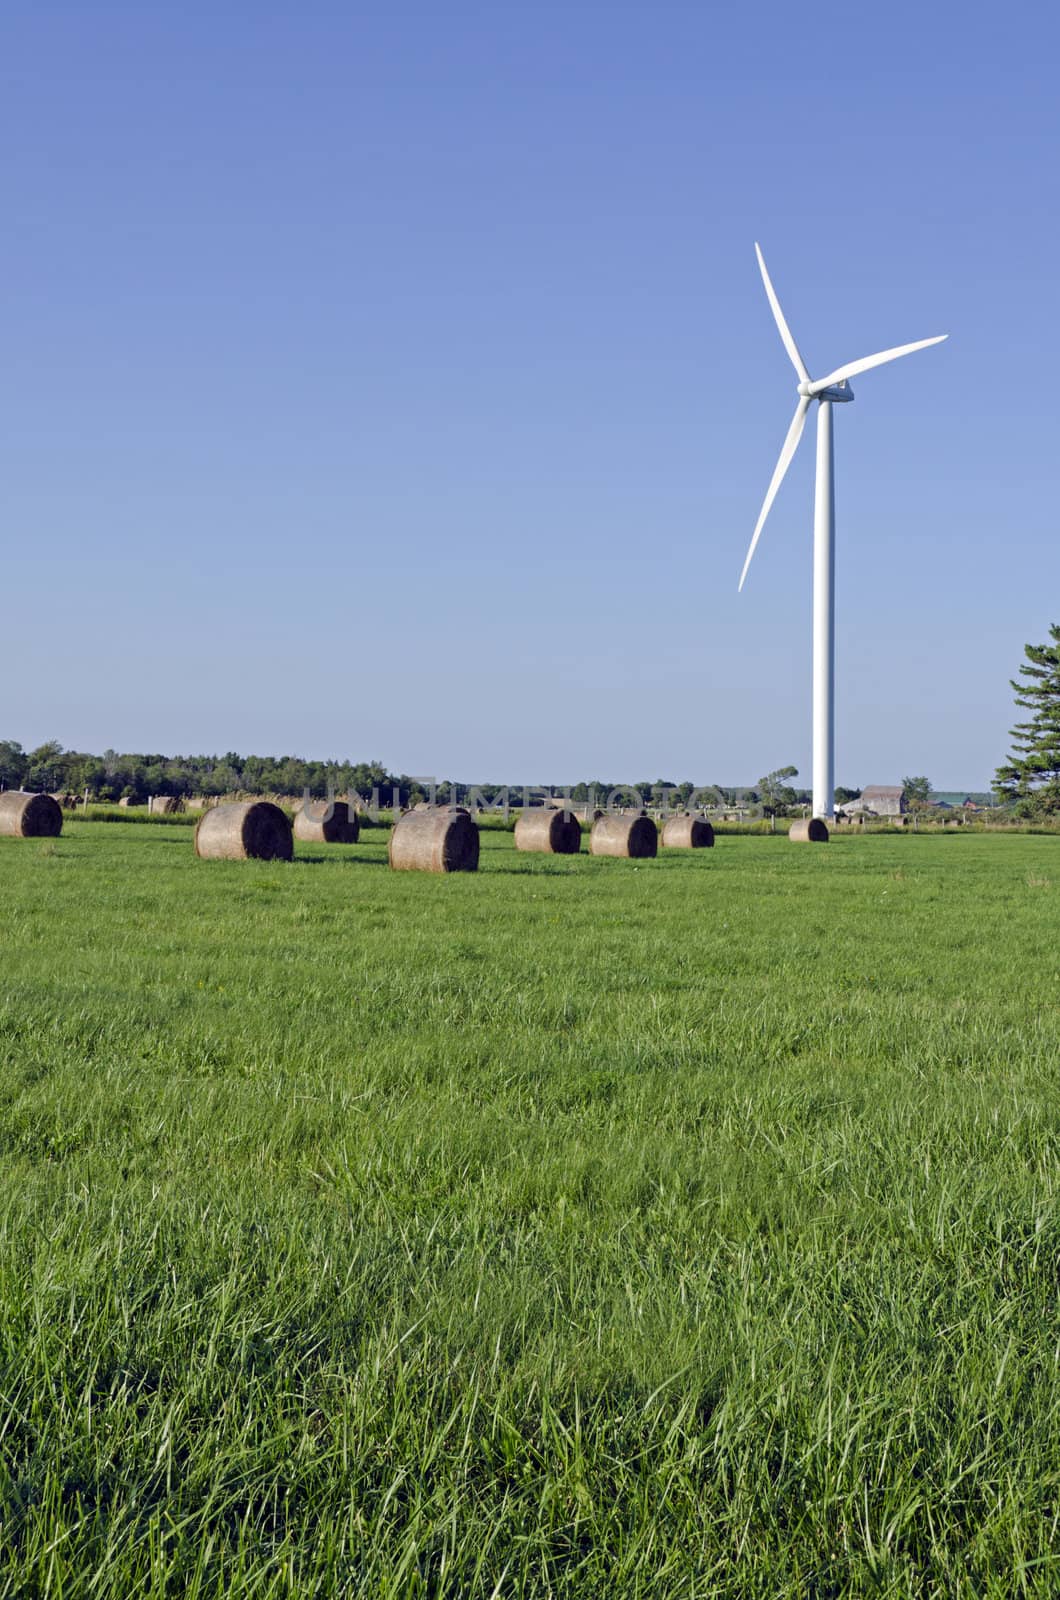 Wind turbine and hay bails in a field on green grass background